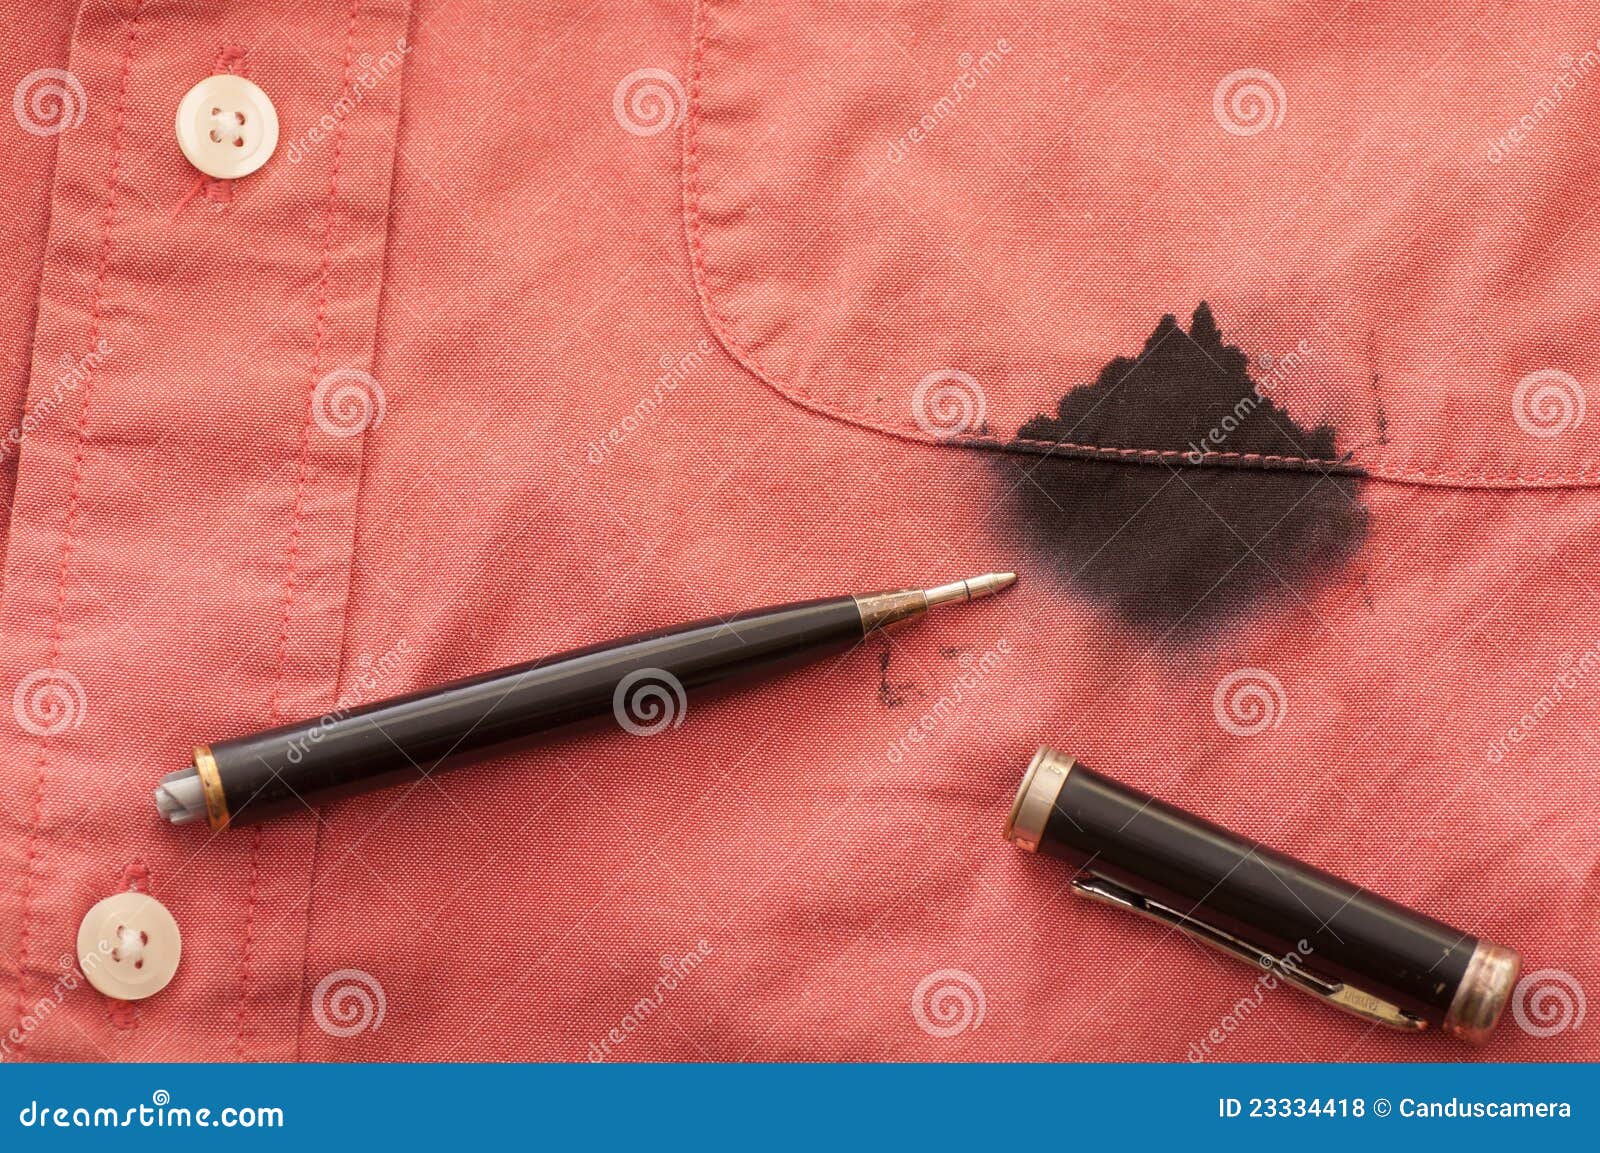 close up of man's stained shirt with broken pen